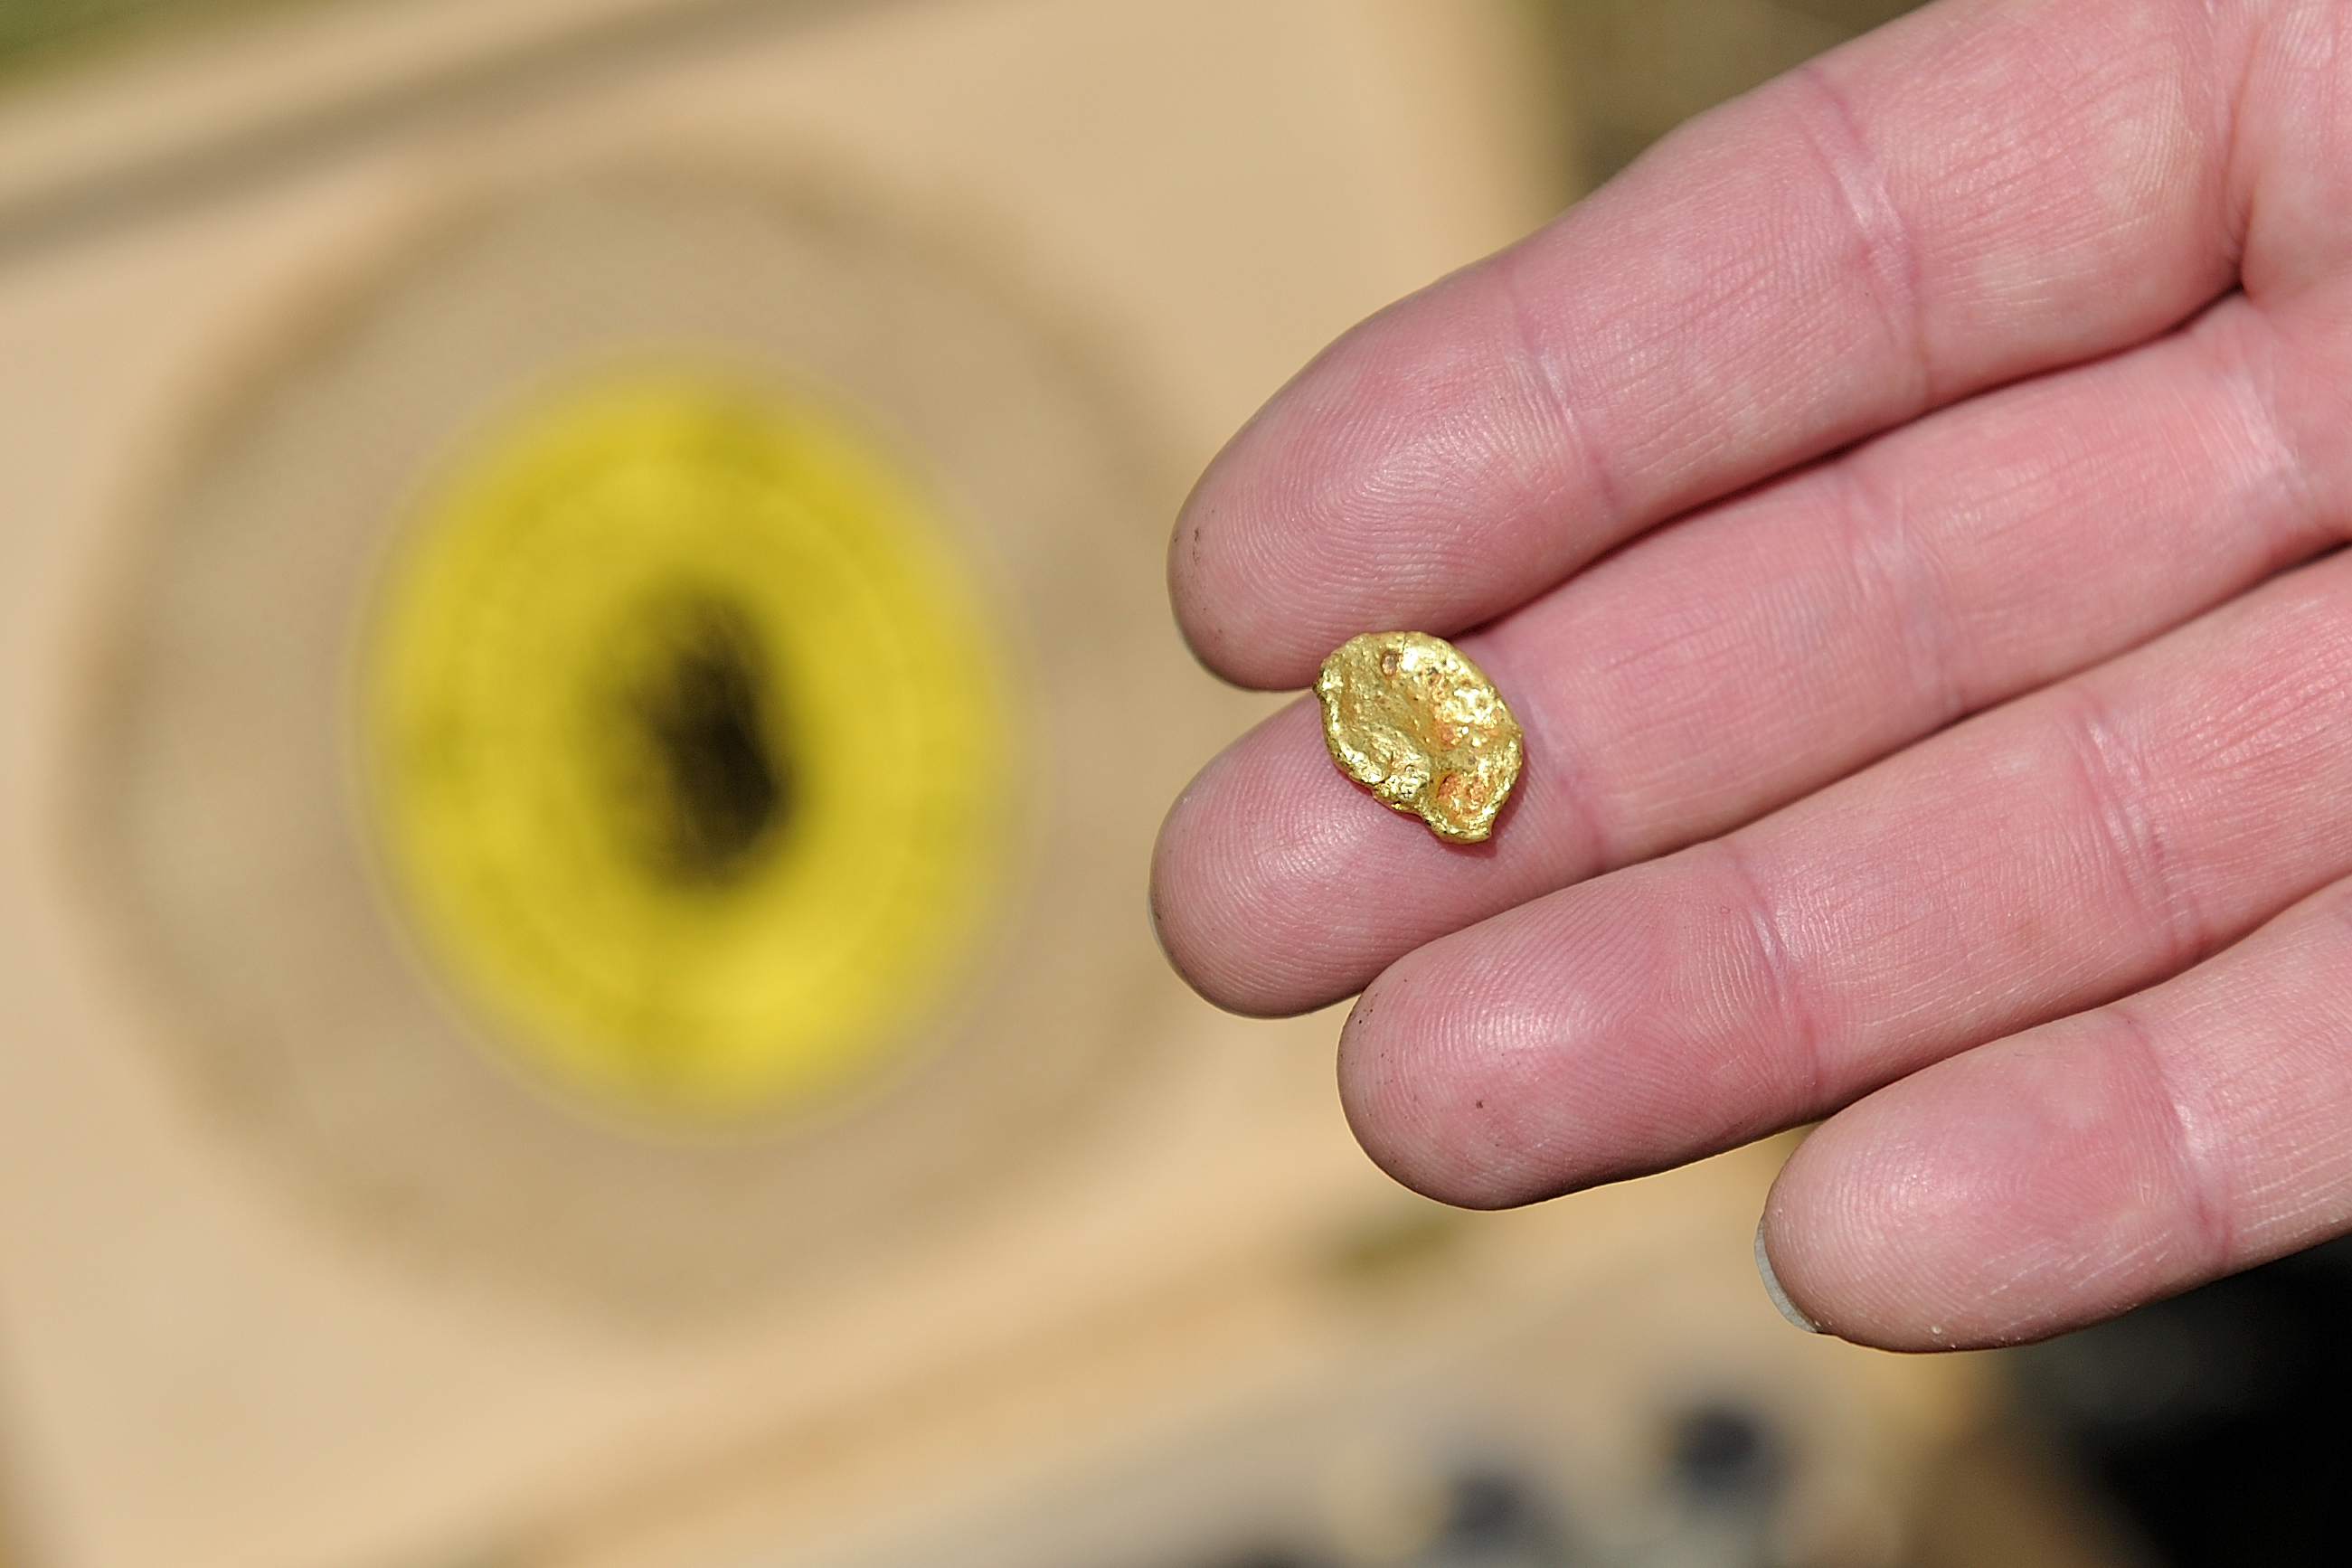 Gold prospector Roman Drozd shows his most valuable finding - a 4 gramms nugget -  during the International Championships in Gold Panning in Zlotoryja, Poland on May 28, 2016. Every year, with the arrival of warm weather, gold diggers from around the globe converge on the Kaczawa river in Poland's gold rush capital Zlotoryja to try their luck at panning. / AFP PHOTO / PIOTR HAWALEJ